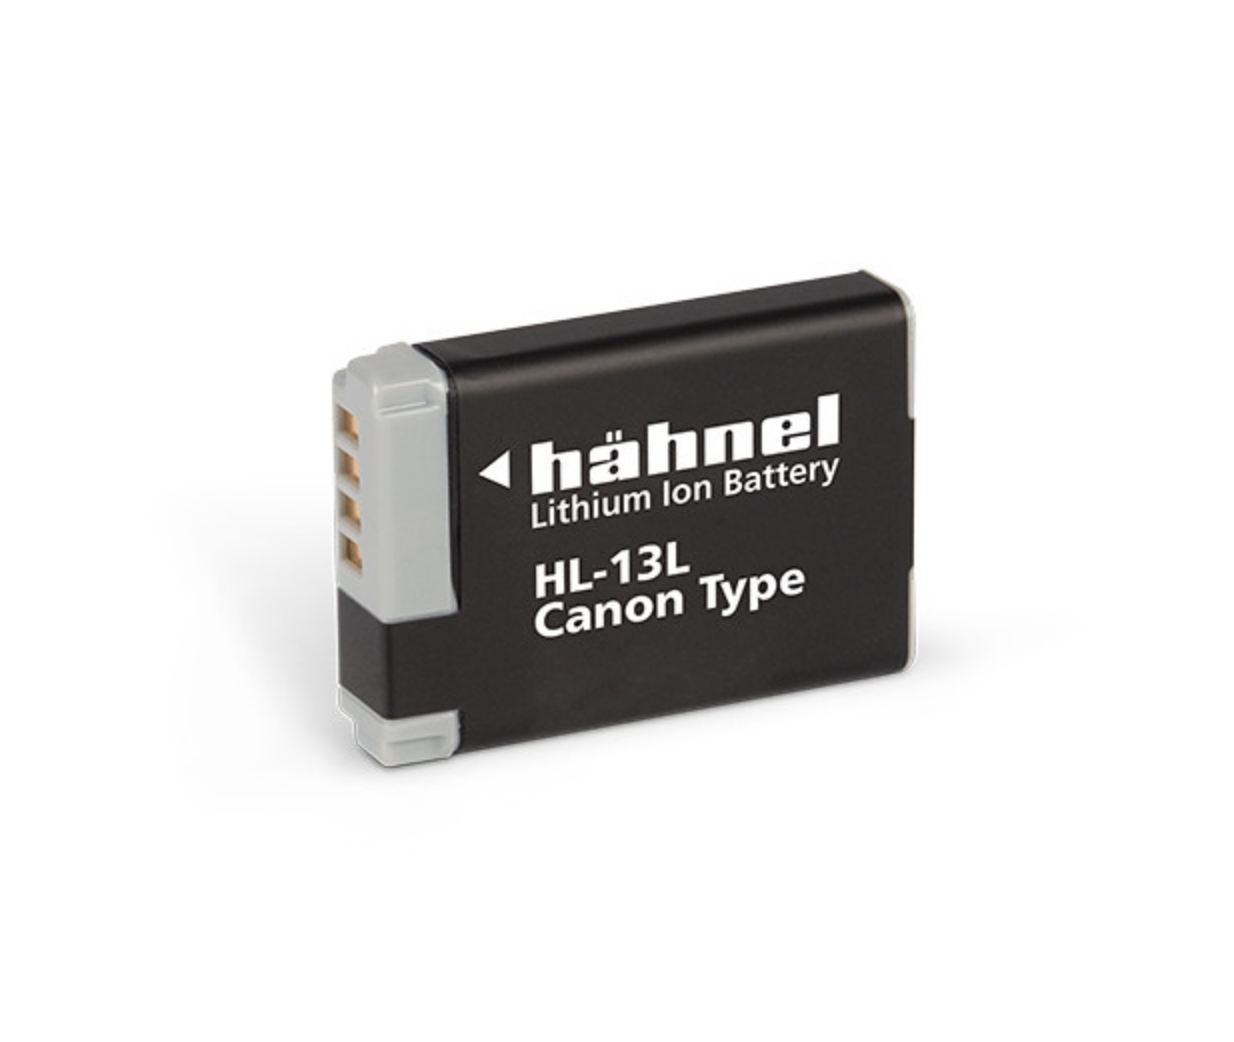 Hahnel NB-13L Li-Ion Battery for Canon G1 X Mark III, G5 X, G7 X, G9 X, and others